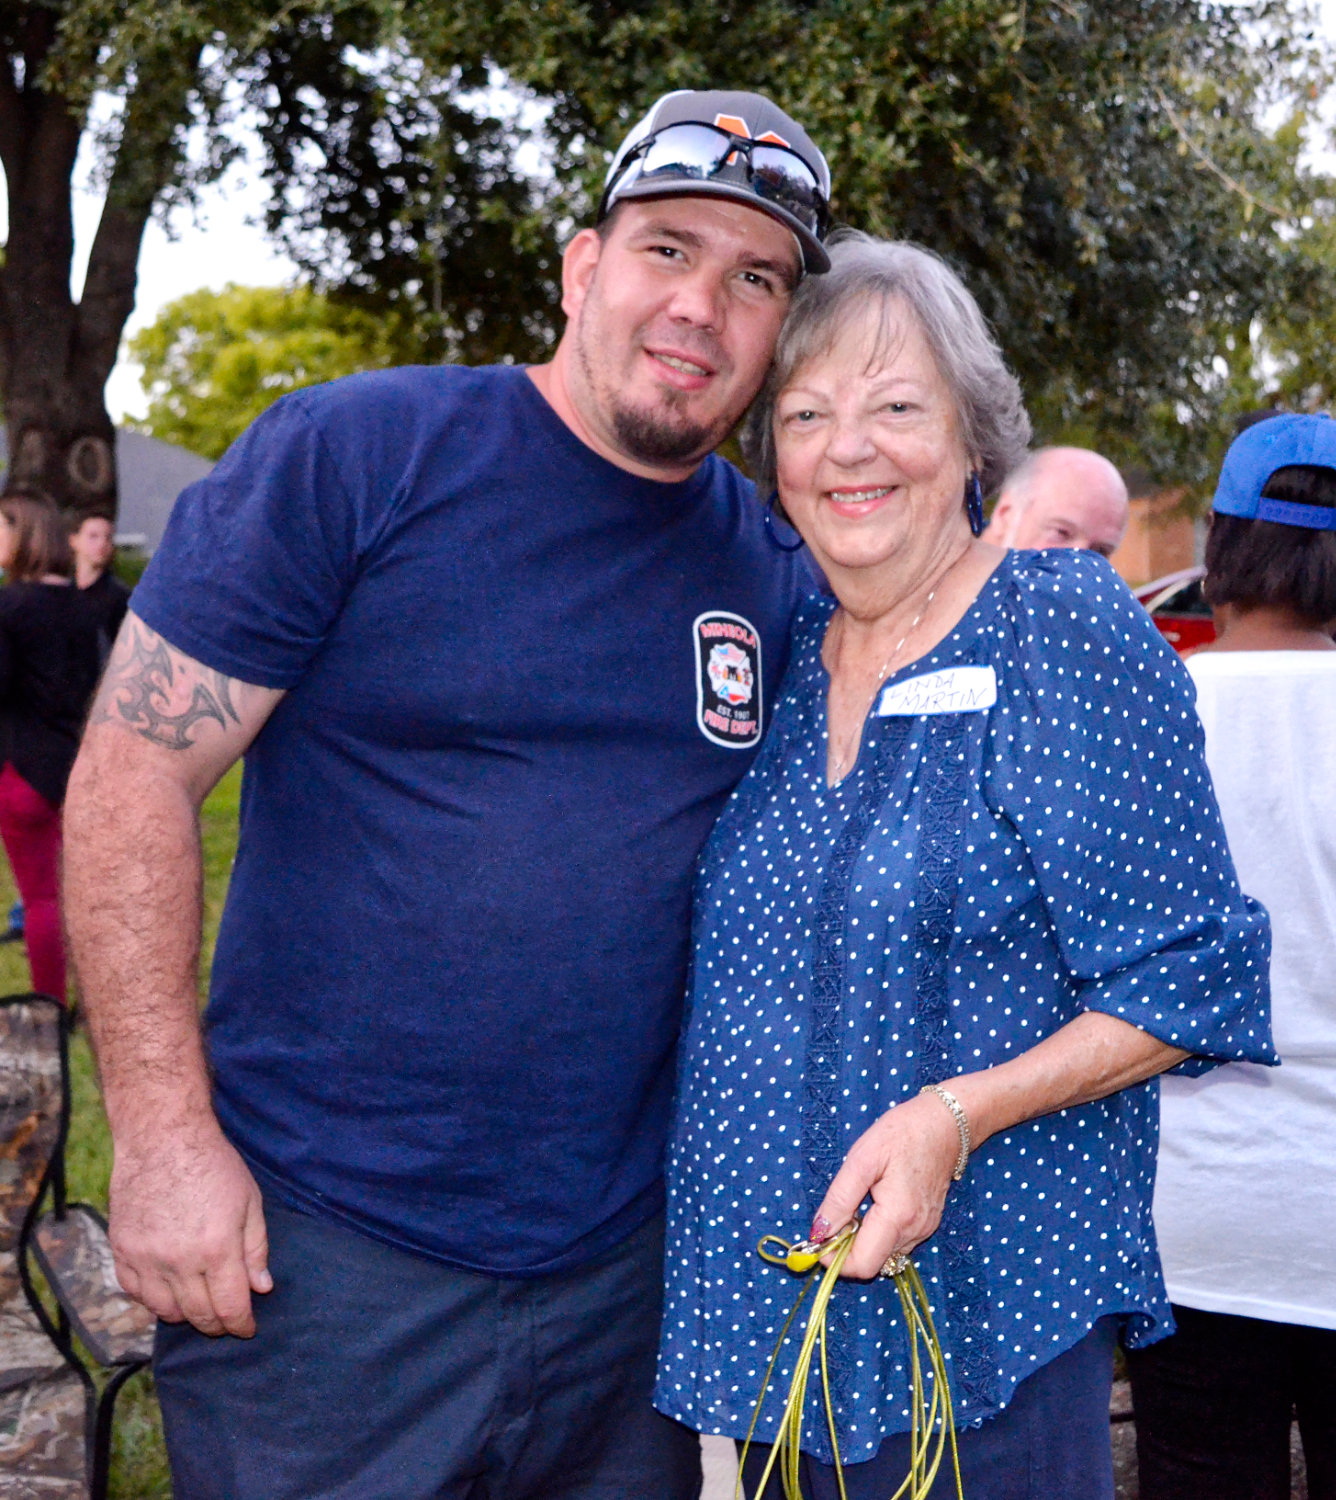 Linda Martin and firefighter Manny Morales enjoy the fellowship and food at her block party to bring the community and first responders together.